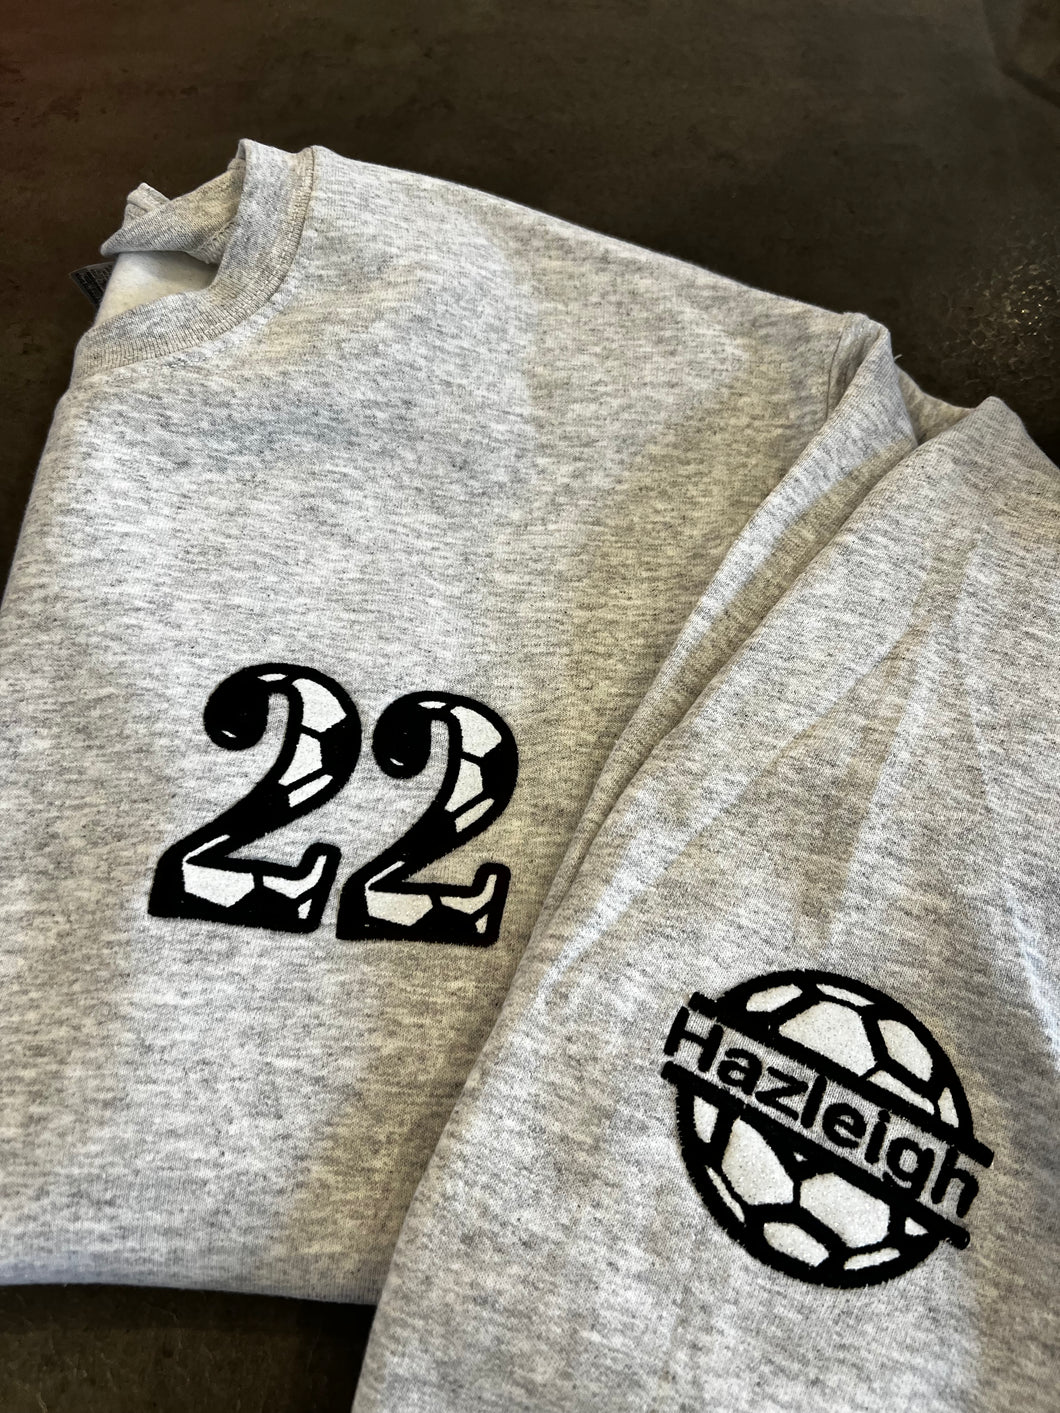 Embroidered Soccer Numbers & Name(s) Crewneck.